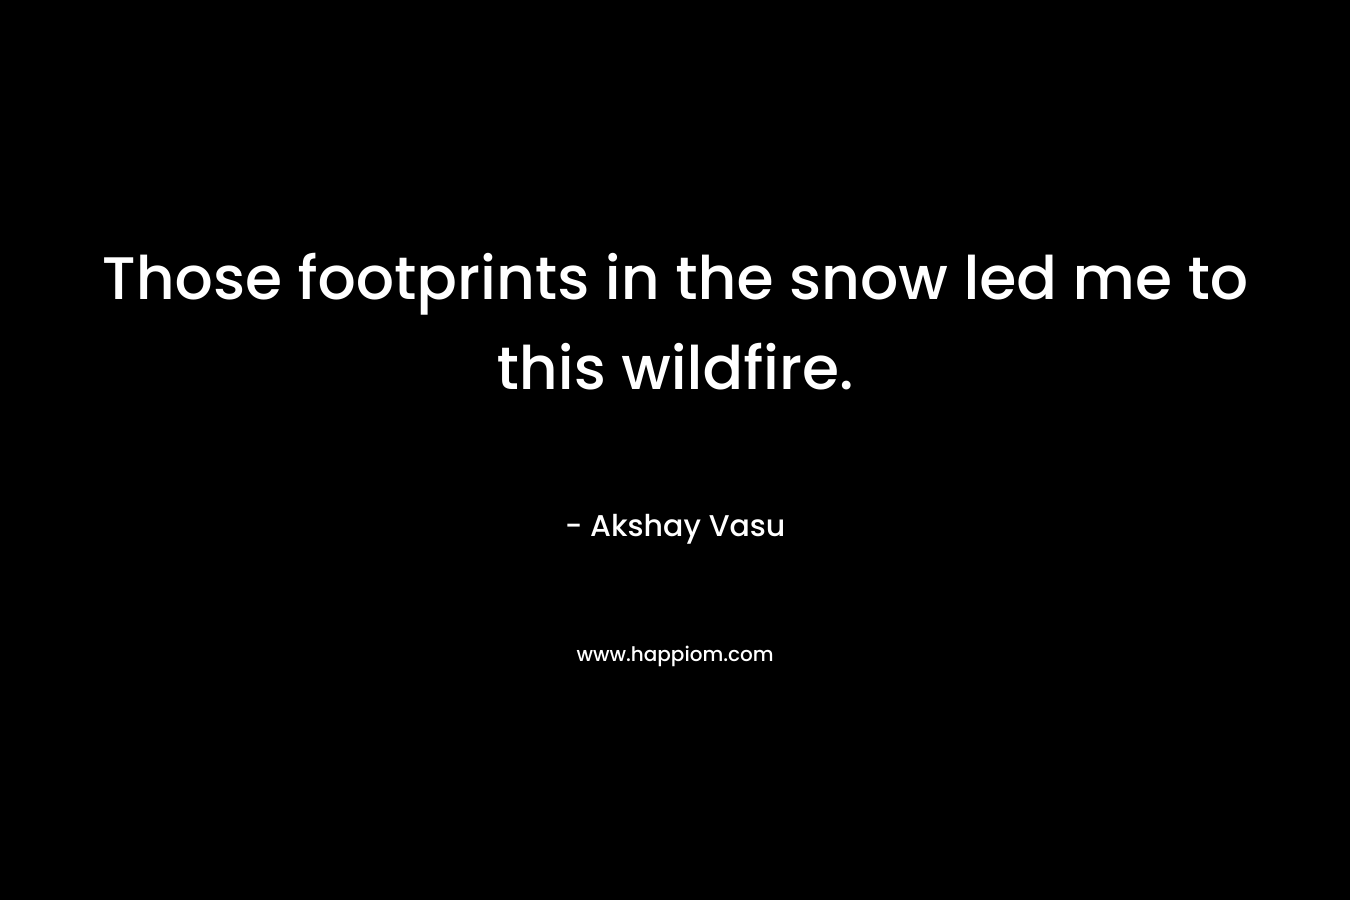 Those footprints in the snow led me to this wildfire. – Akshay Vasu